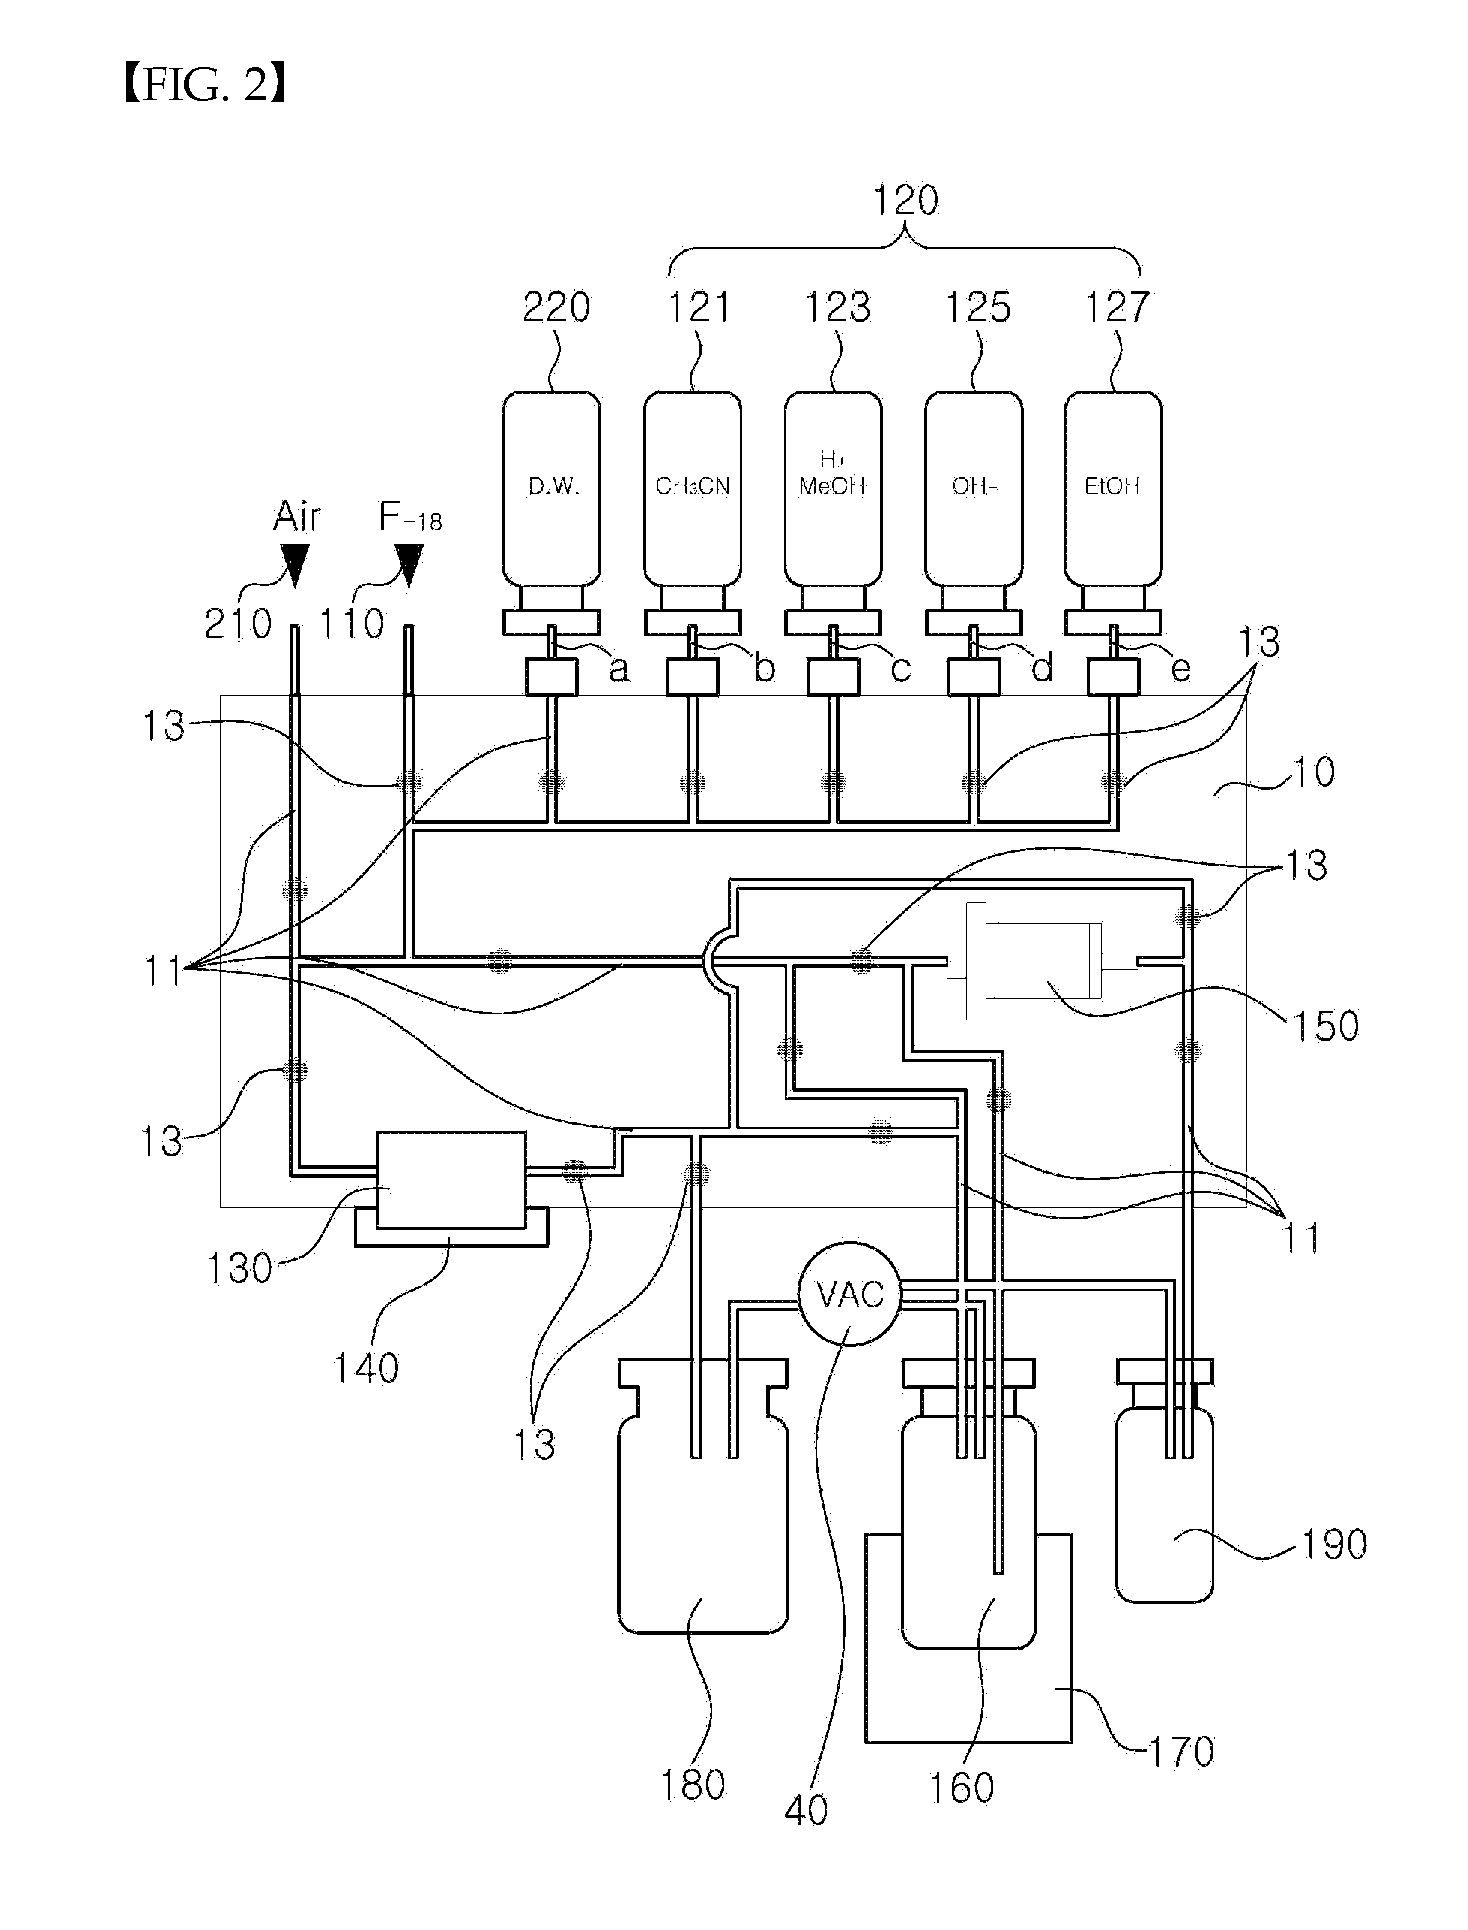 Apparatus and method for synthesizing f-18 labeled radioactive pharmaceuticals